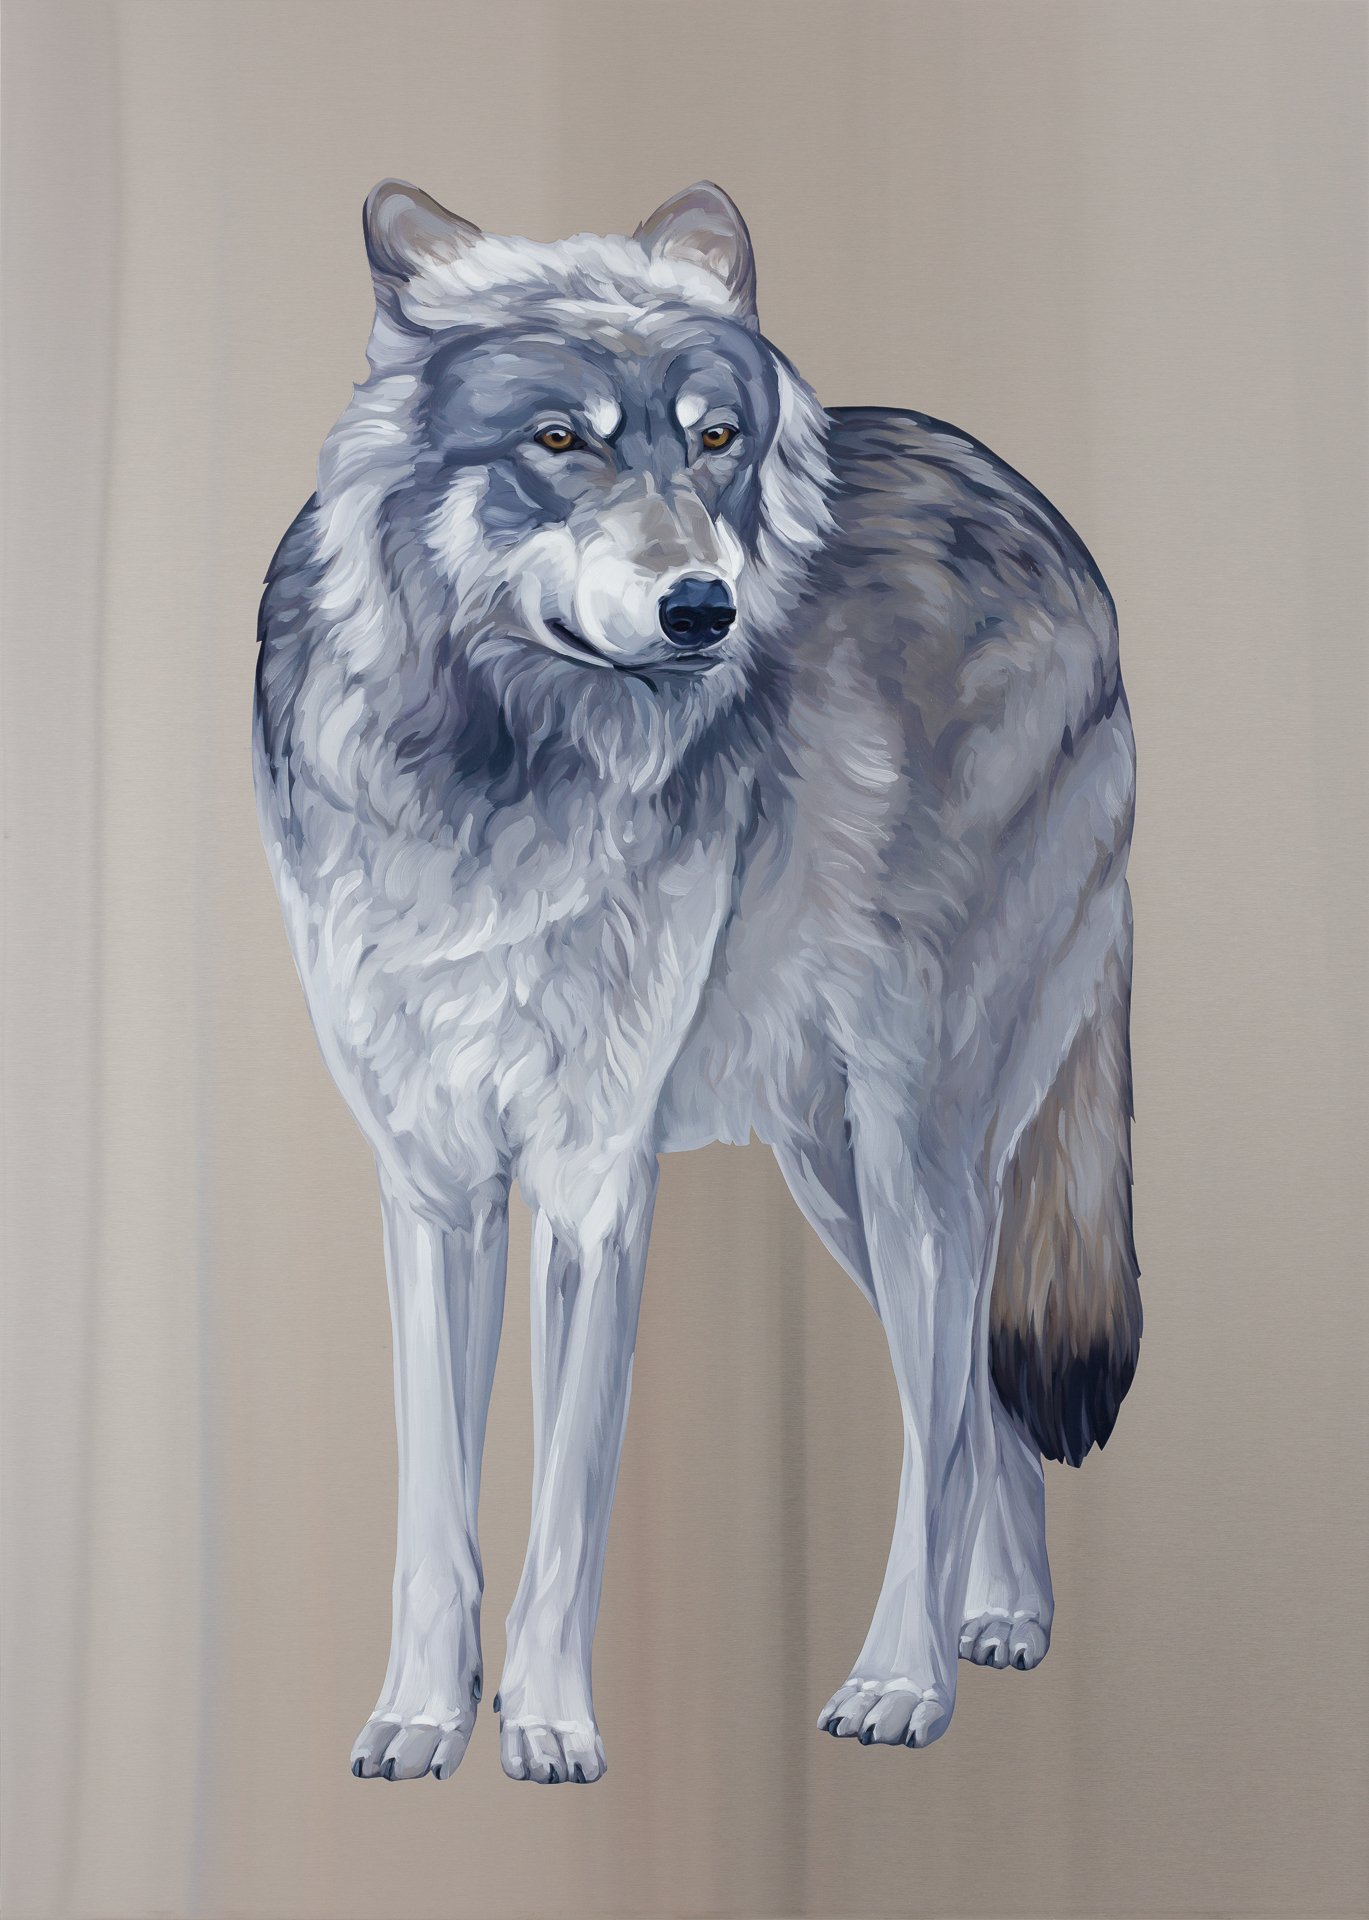  Gray Wolf. Oil on stainless steel, 42in x 30in 